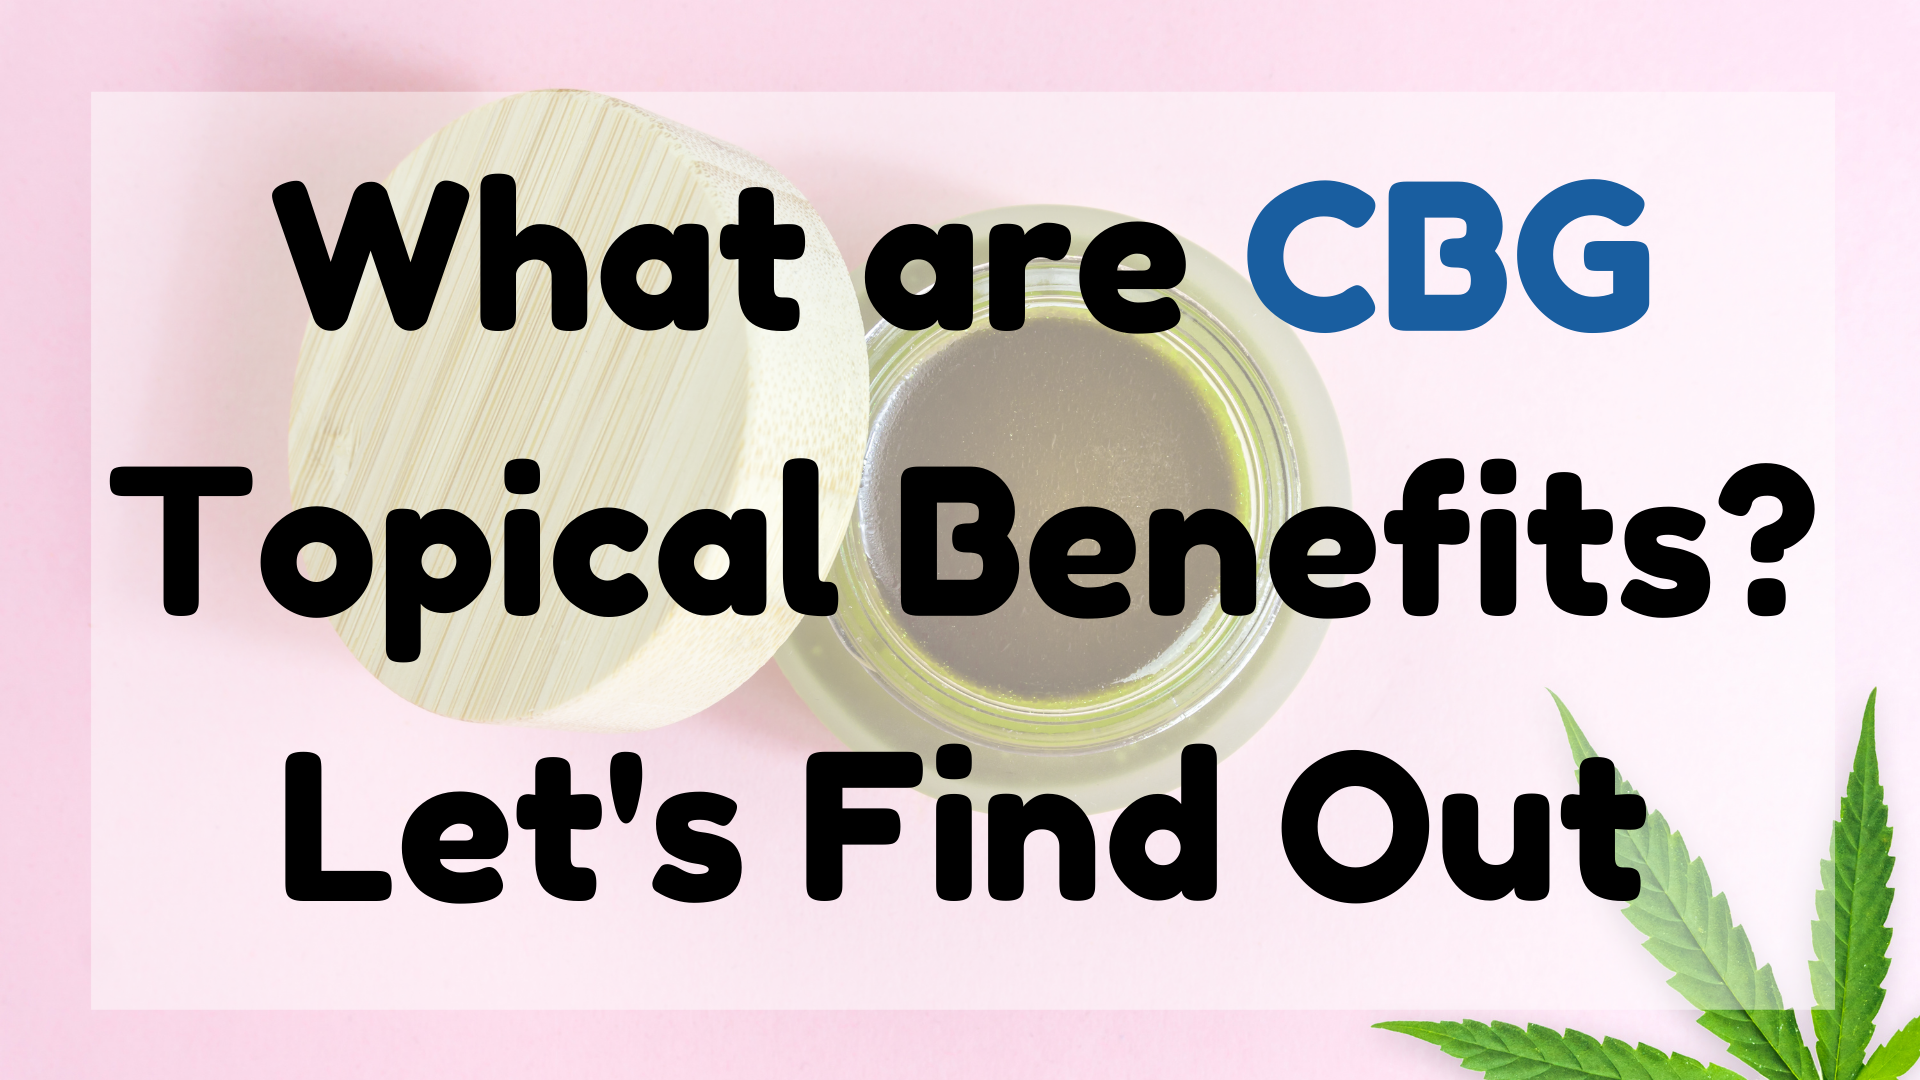 What Are CBG Topical Benefits